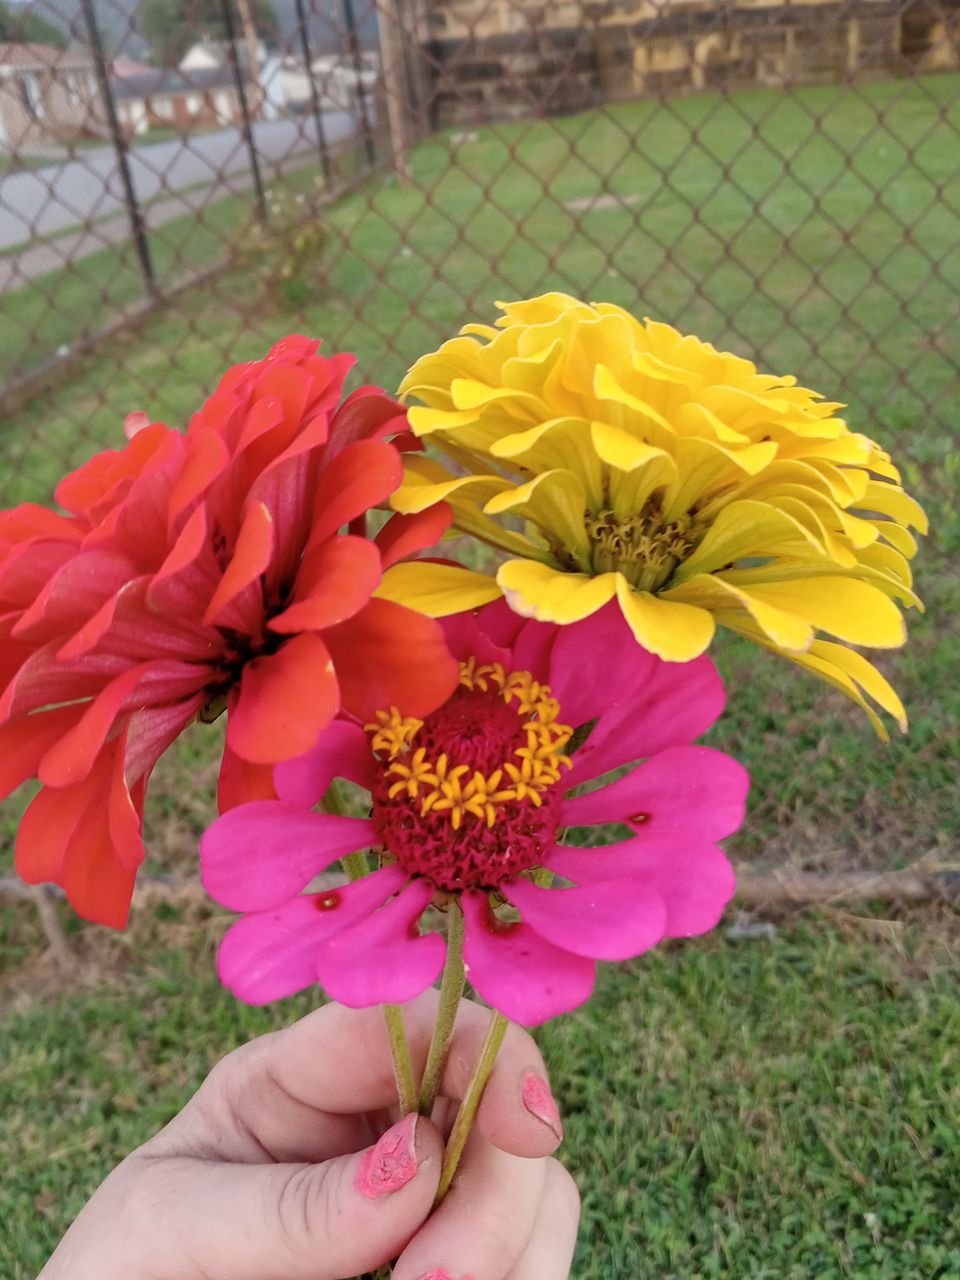 flower, flowering plant, plant, hand, freshness, beauty in nature, one person, nature, holding, fragility, yellow, flower head, petal, close-up, inflorescence, bouquet, fence, day, floristry, women, growth, outdoors, lifestyles, focus on foreground, adult, floral design, personal perspective, pink